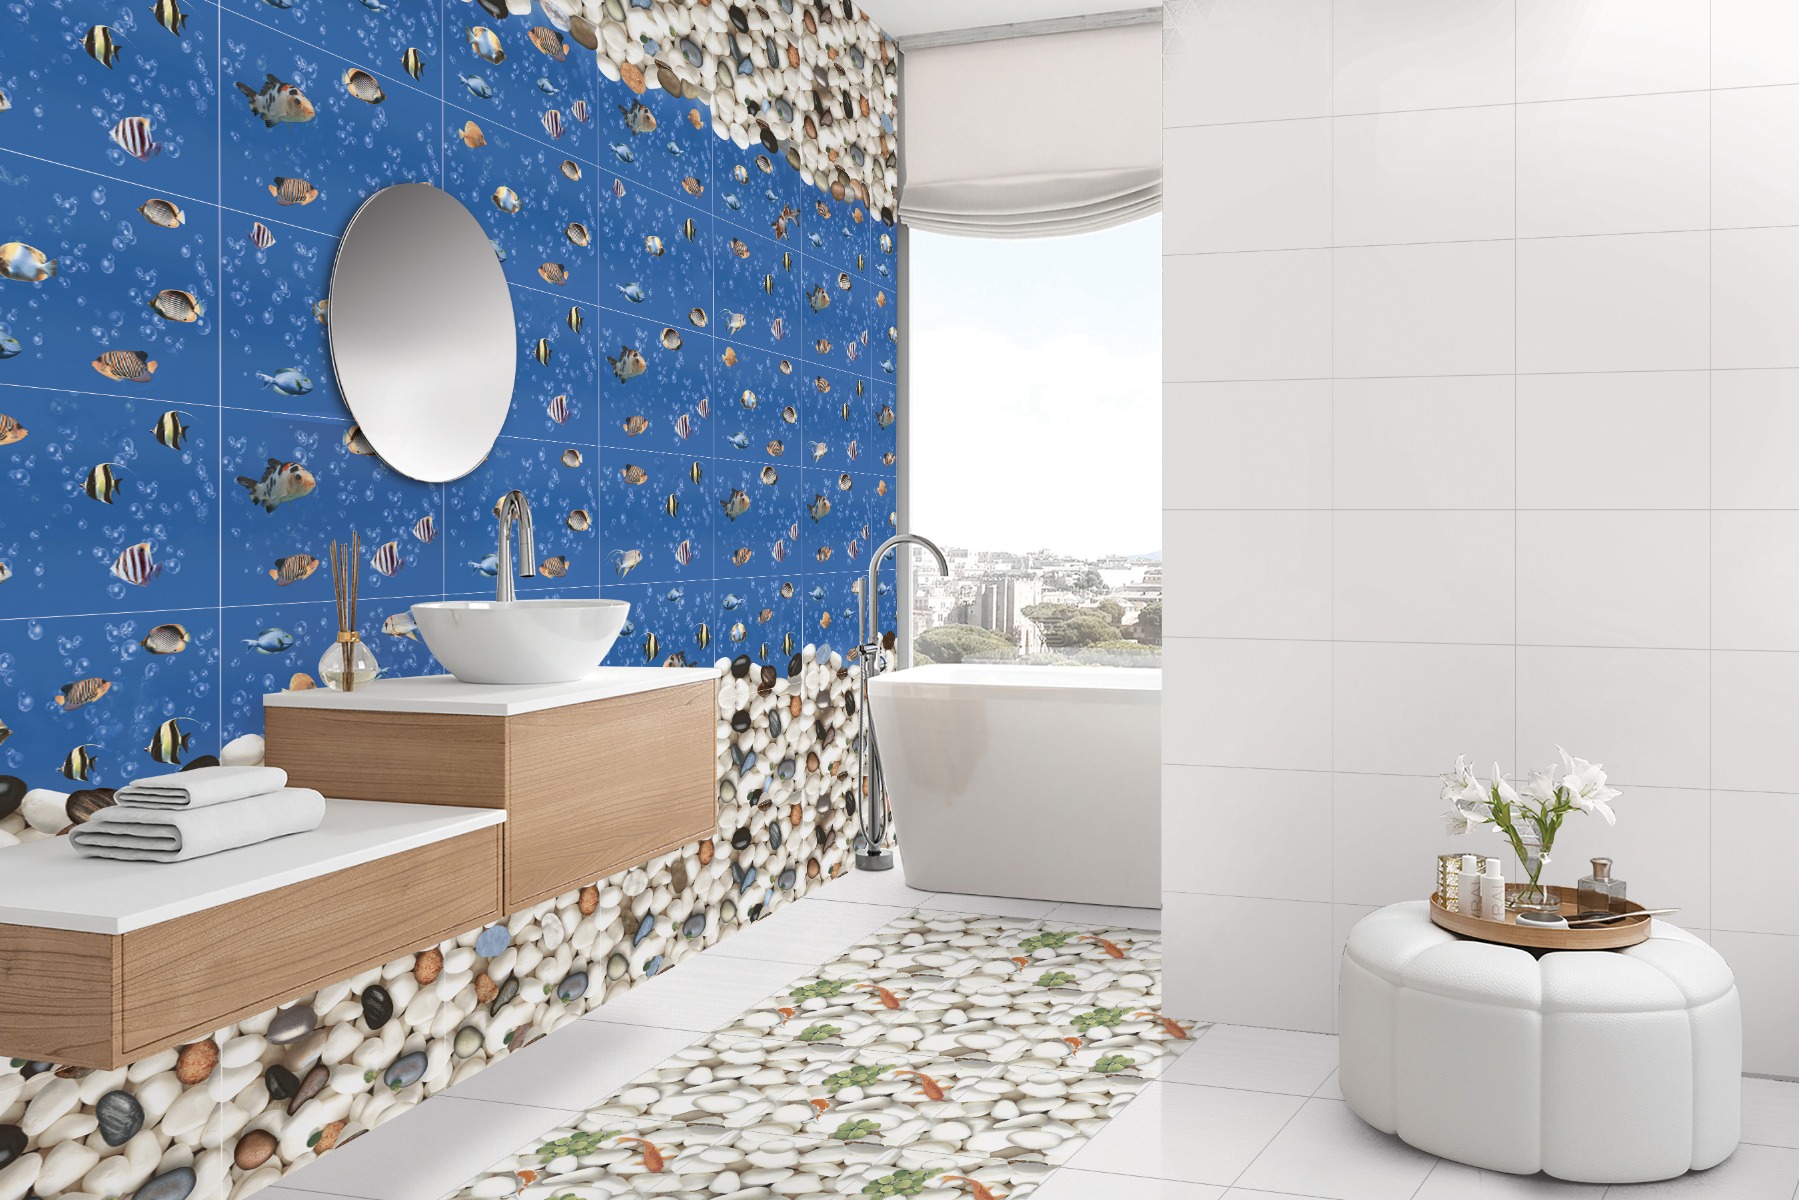 Our favourite decorative ceramic tiles for your home